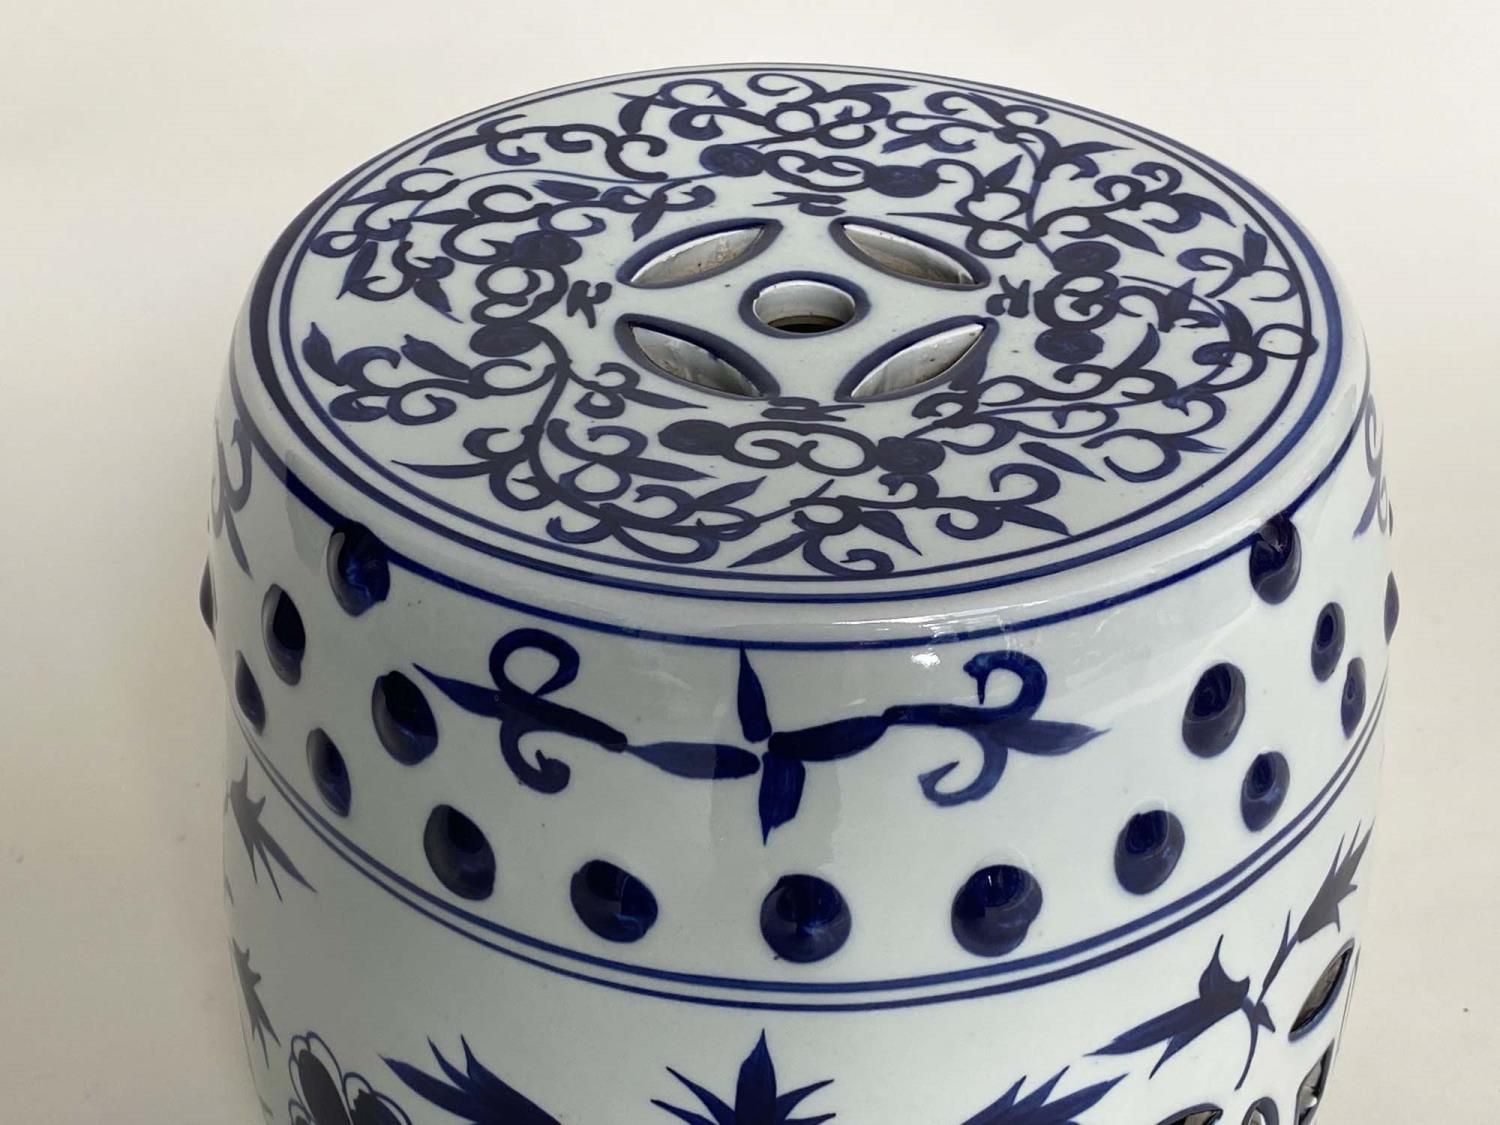 CHINESE STOOL, blue and white ceramic of barrel form with pierced top, 40cm H. - Image 2 of 4